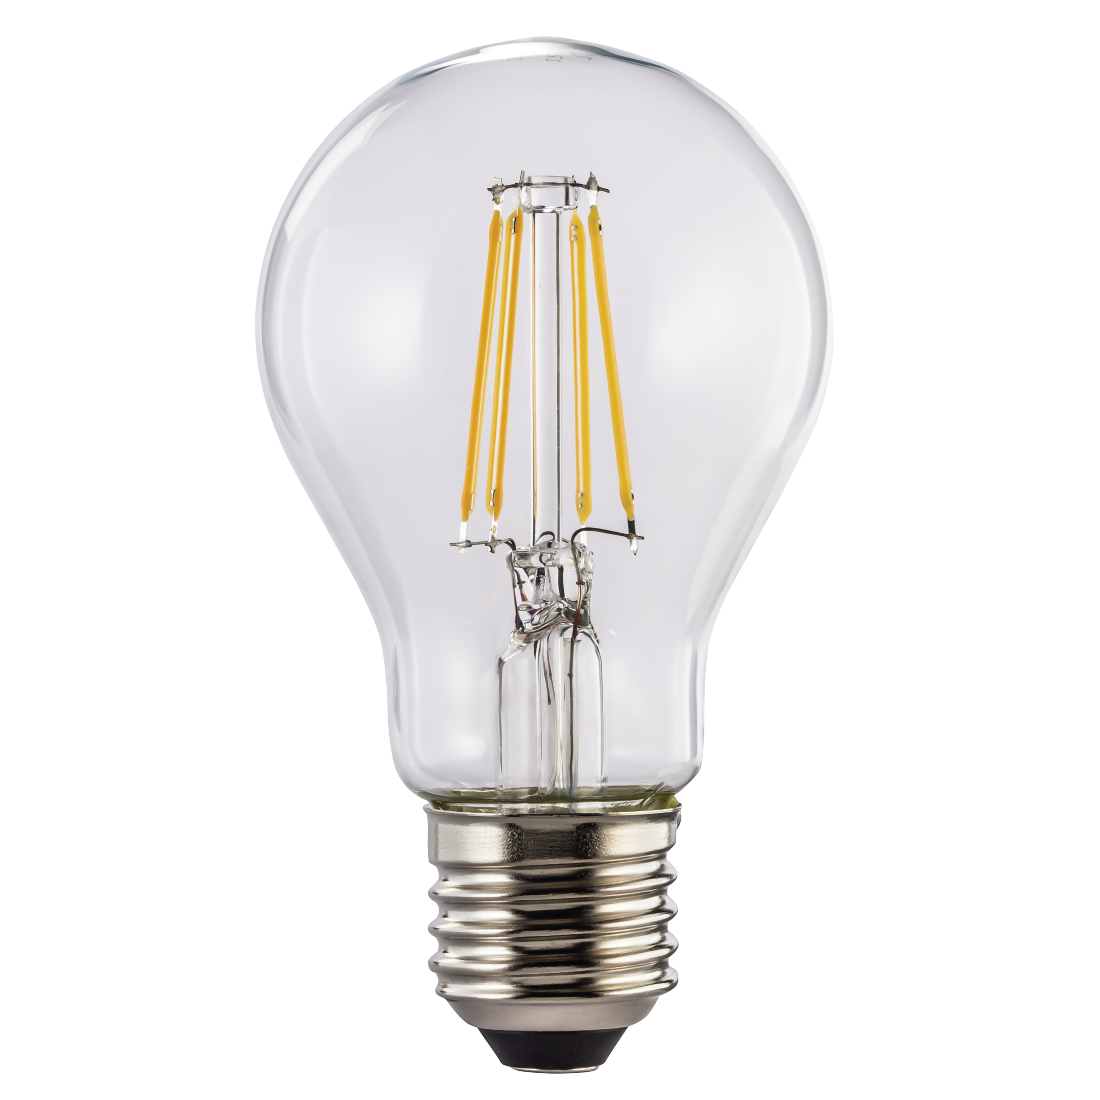 abx High-Res Image - Xavax, LED Filament, E27, 810lm replaces 60W, incandescent bulb, warm white